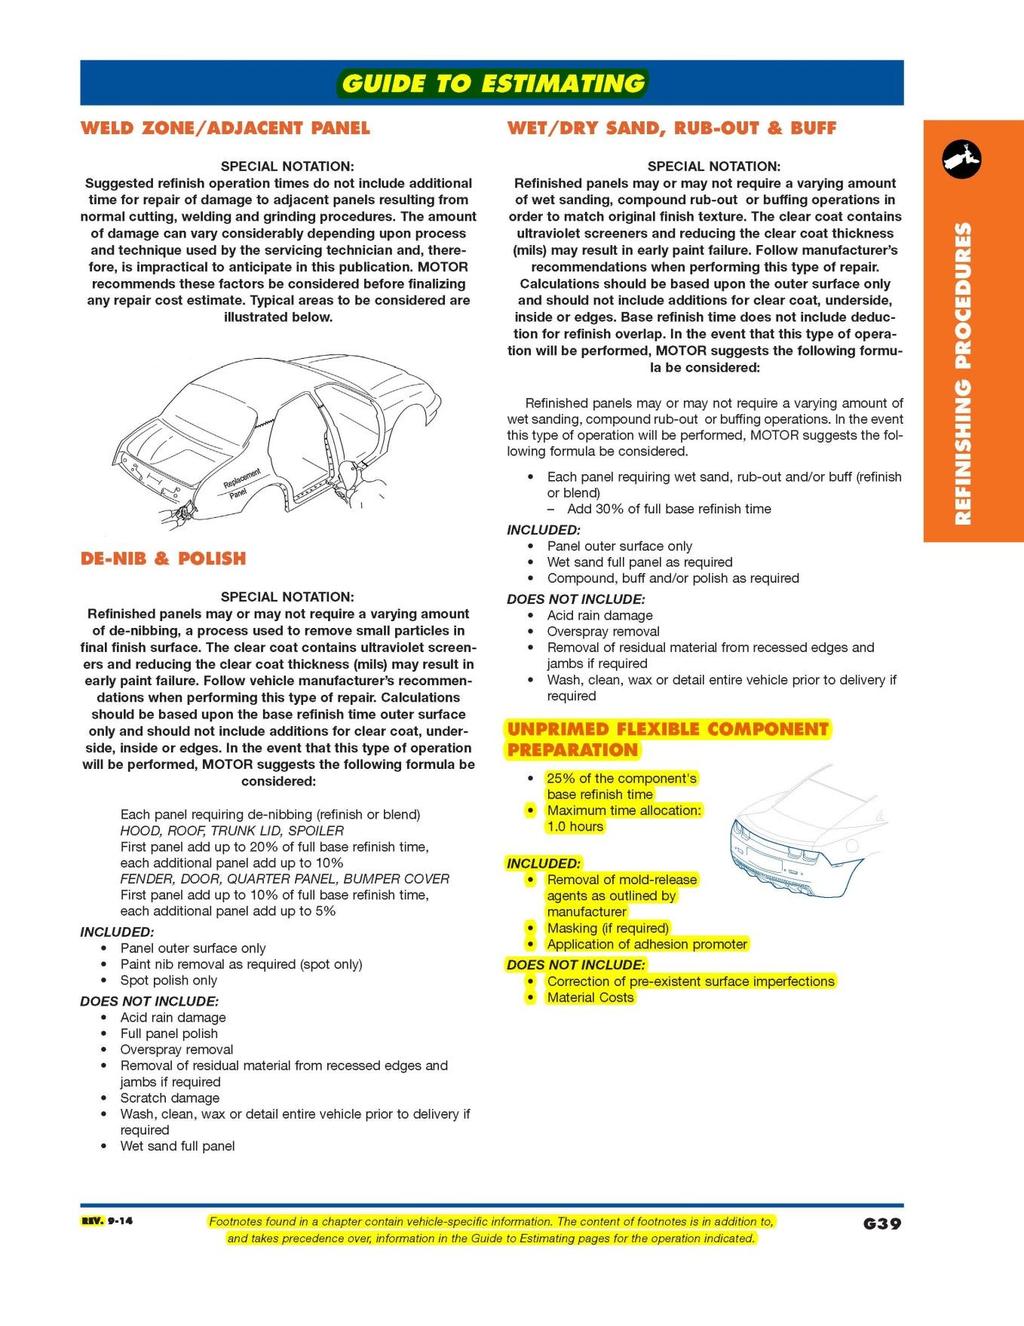 CCC/MOTOR Source: CCC/Motor Guide to Estimating, Rev.